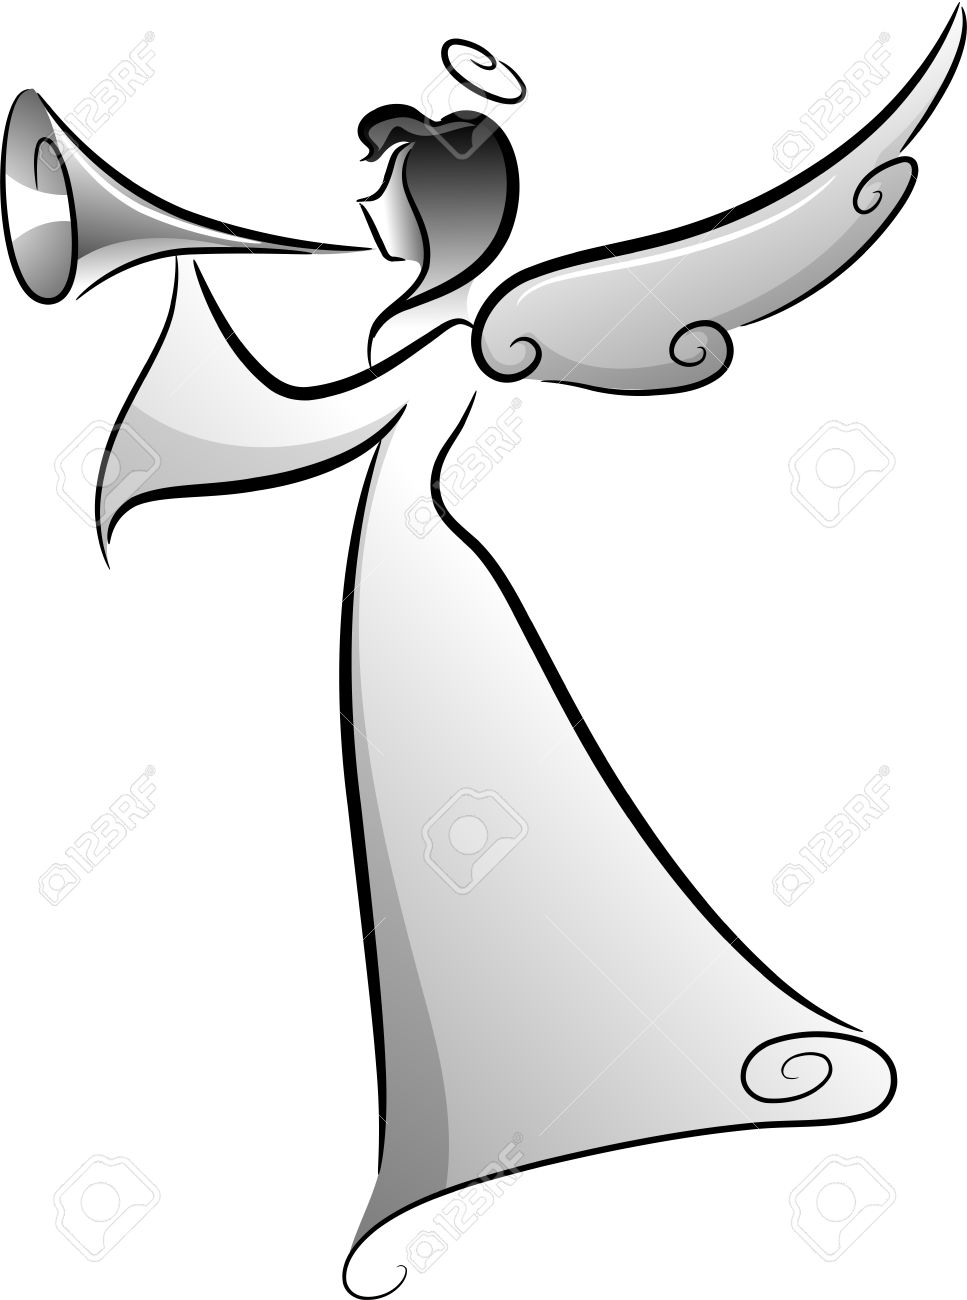 Angel blowing trumpet clipart